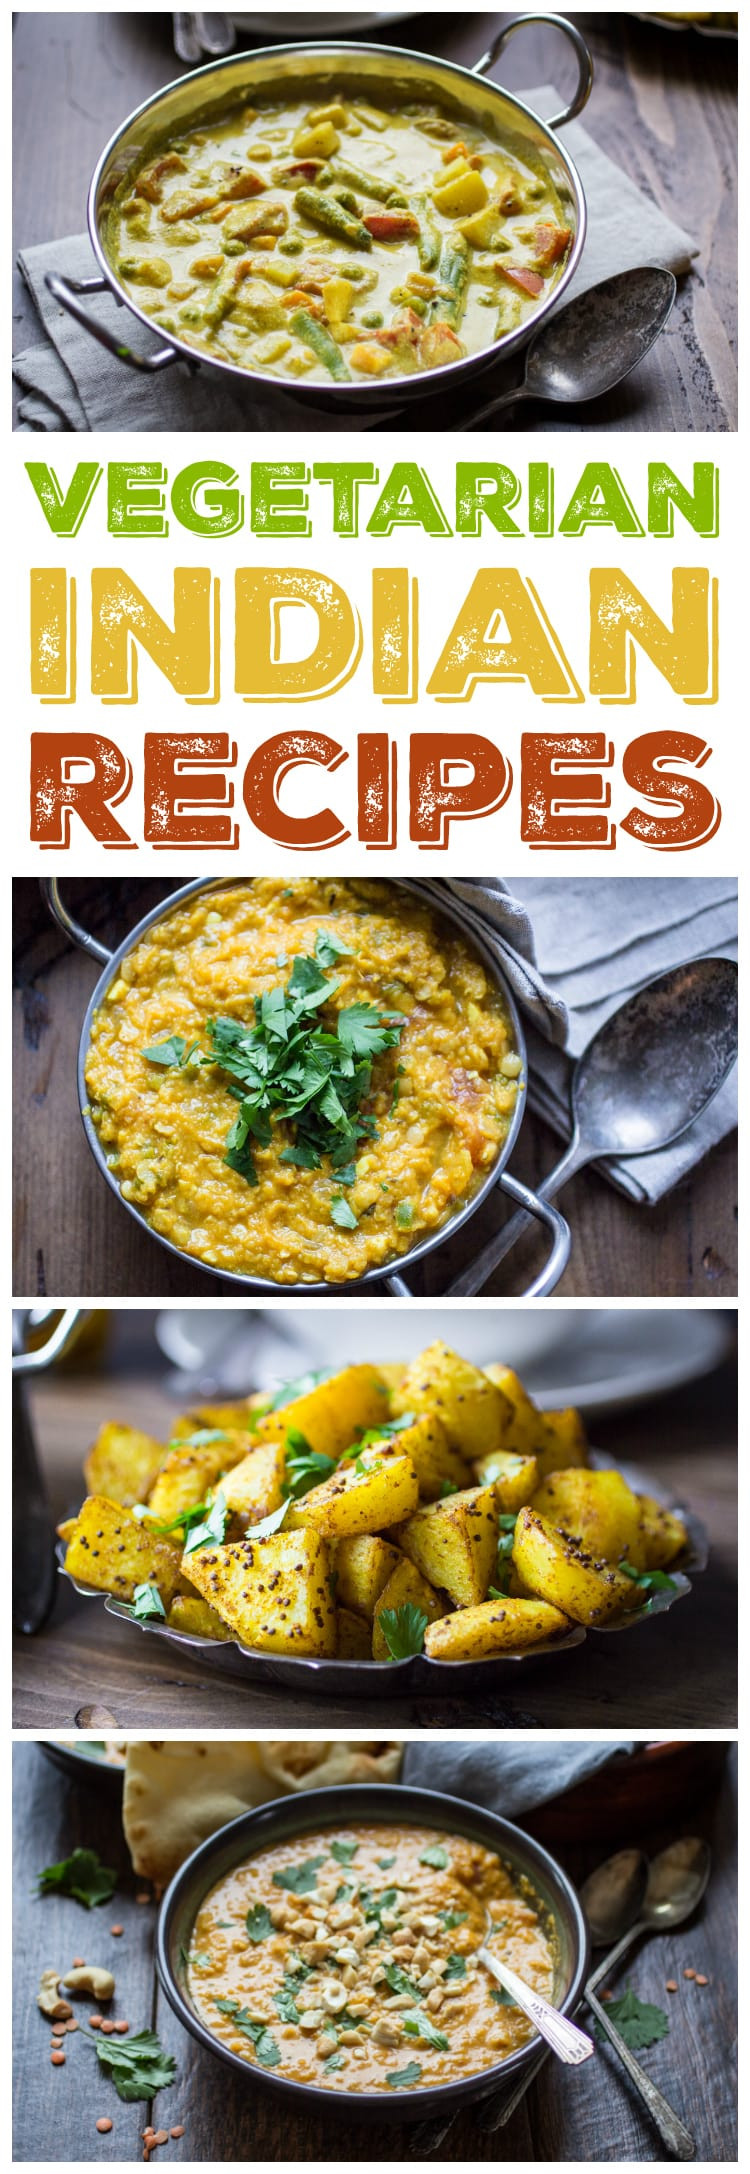 Indian Cooking Recipes
 10 Ve arian Indian Recipes to Make Again and Again The